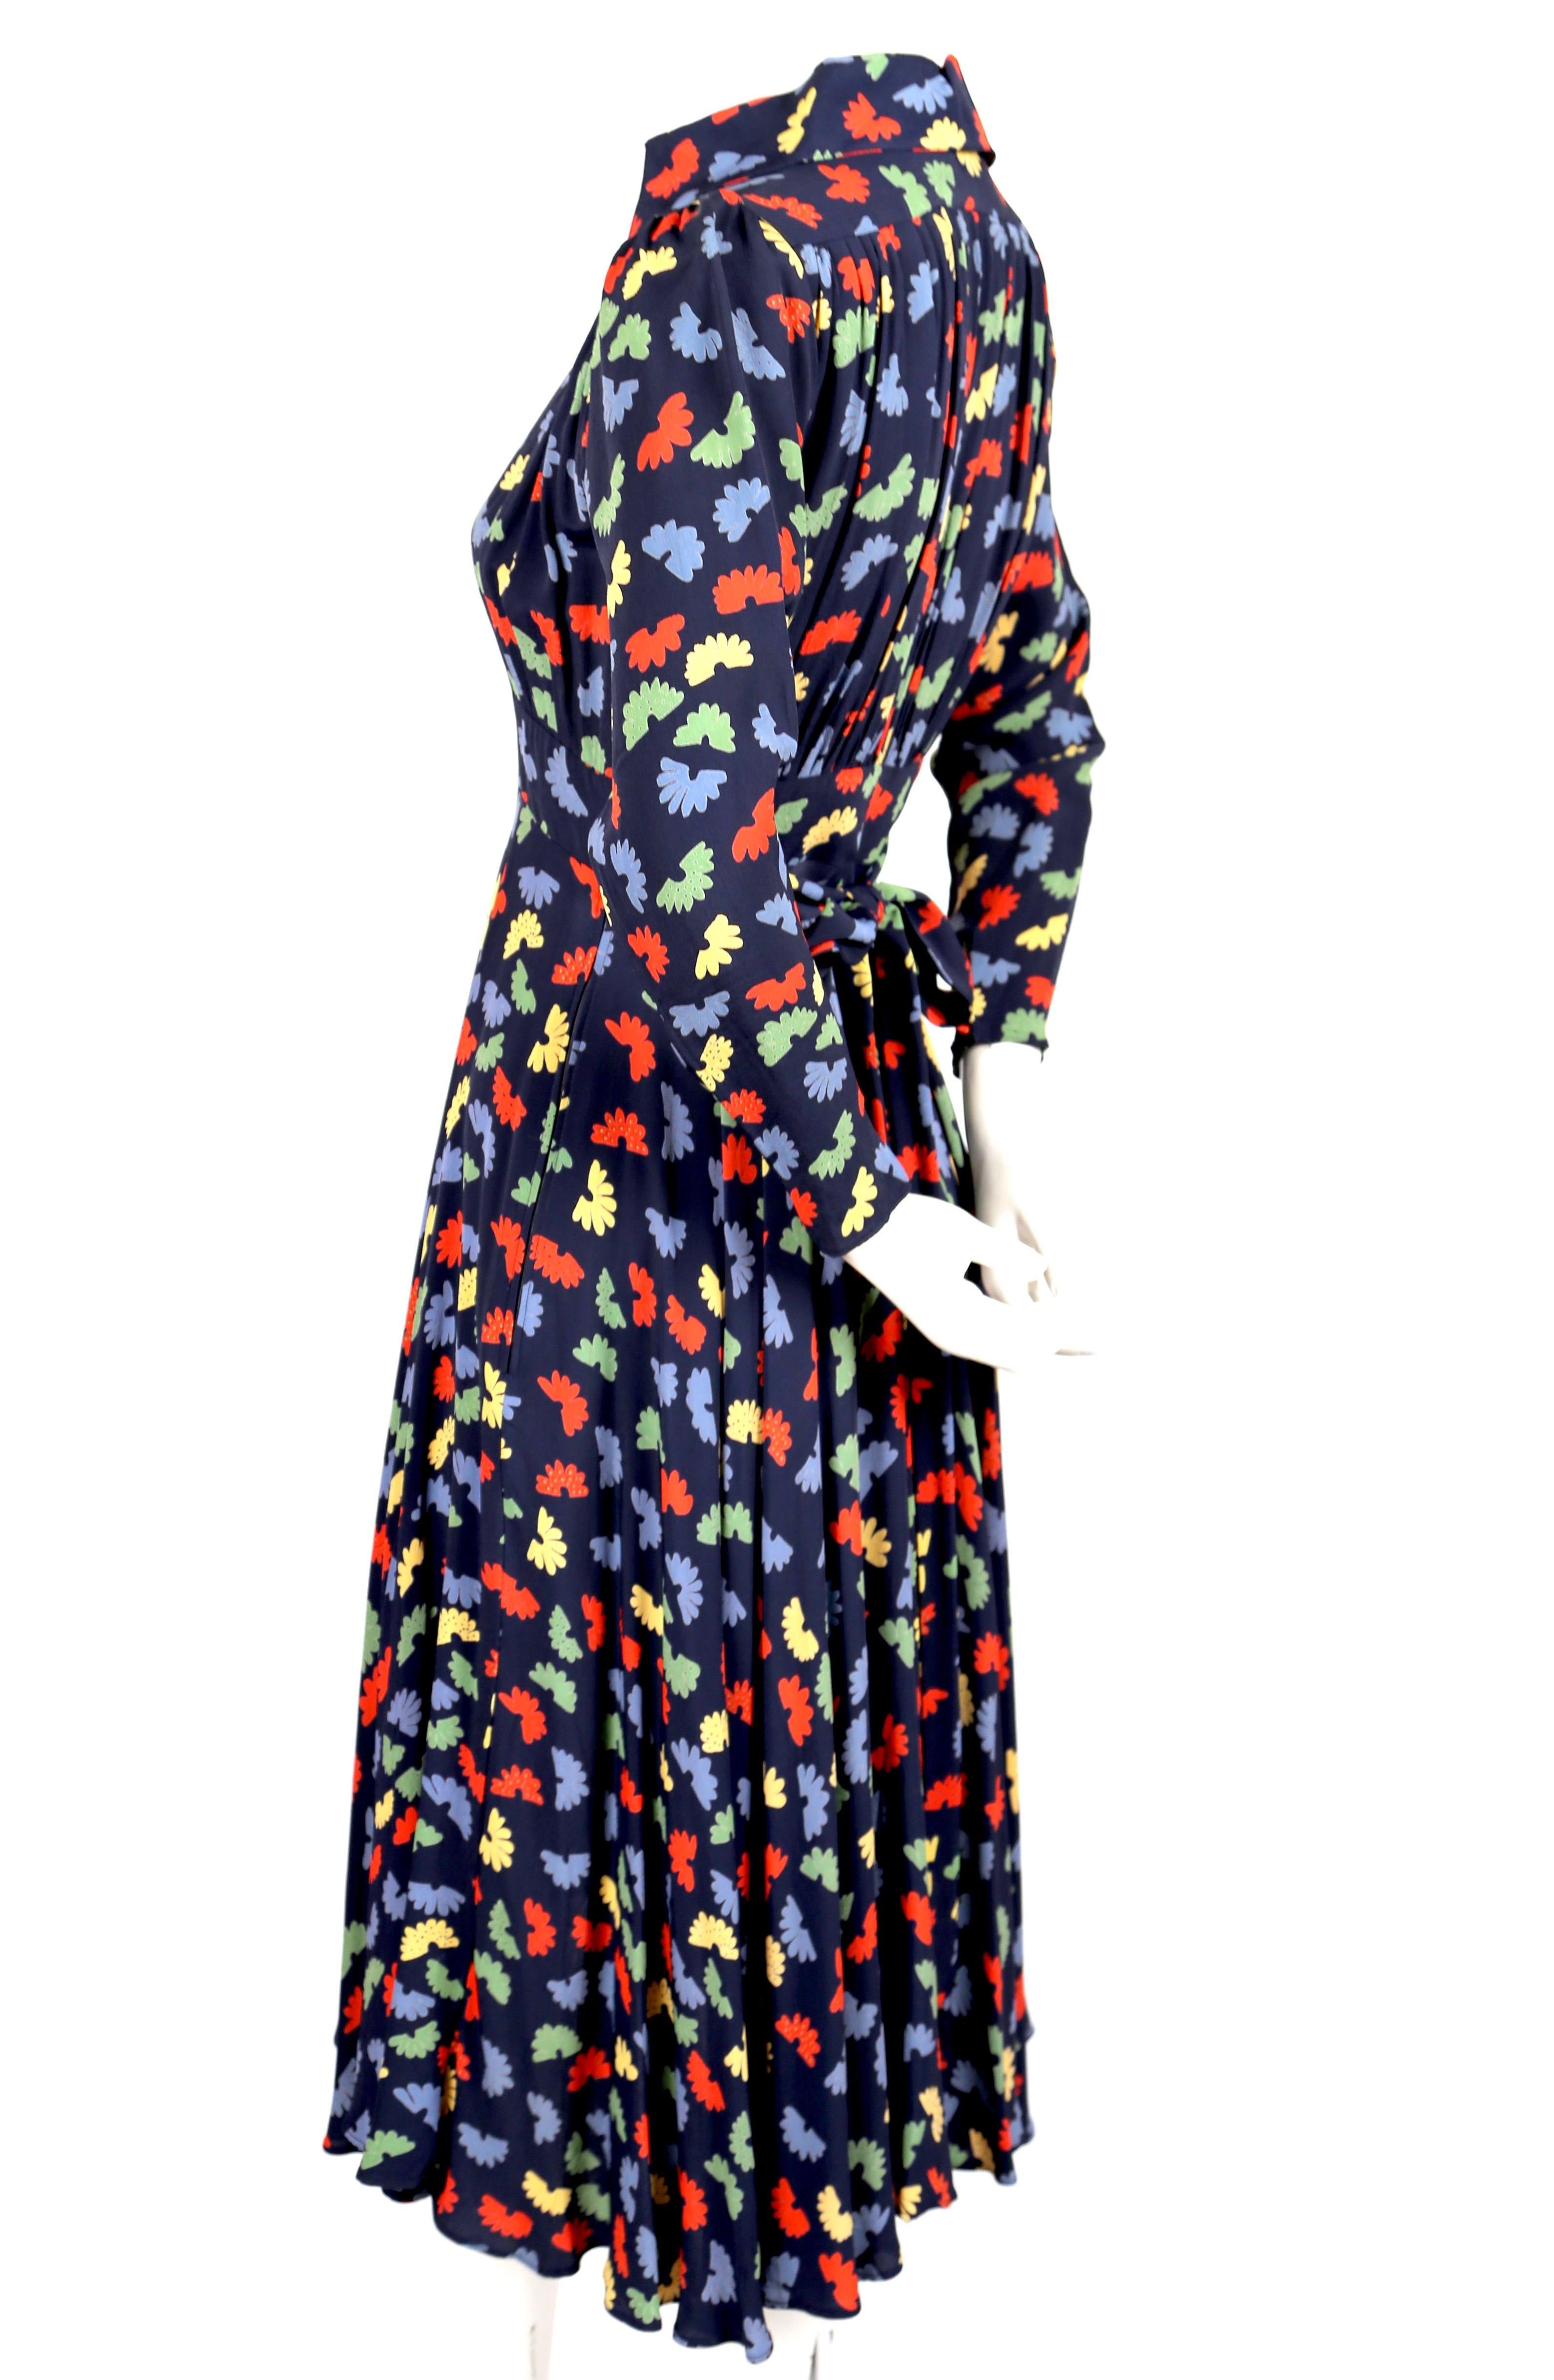 Very rare, Ossie Clark dress from Quorum dating to the 1970's. Celia Birtwell fan printed fabric. Plunging neckline. Zips up side. Adjustable ties at back. Colors are blue, red, yellow, and green. Covered buttons at wrists. Labeled a UK size 8 which